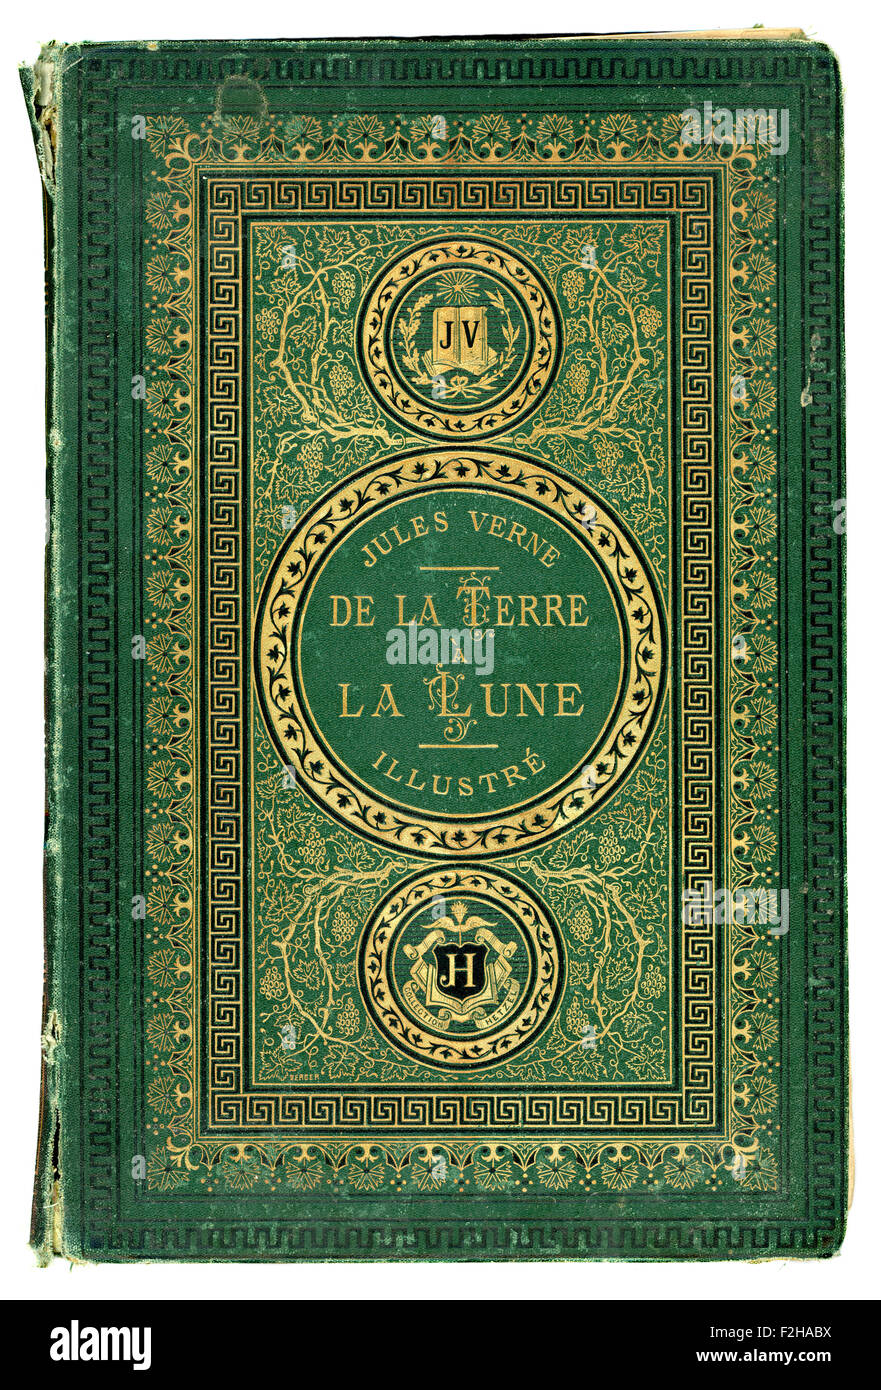 Antique book cover of the Jules Verne novel De La Terre a La Lune (From the Earth to the Moon). Stock Photo